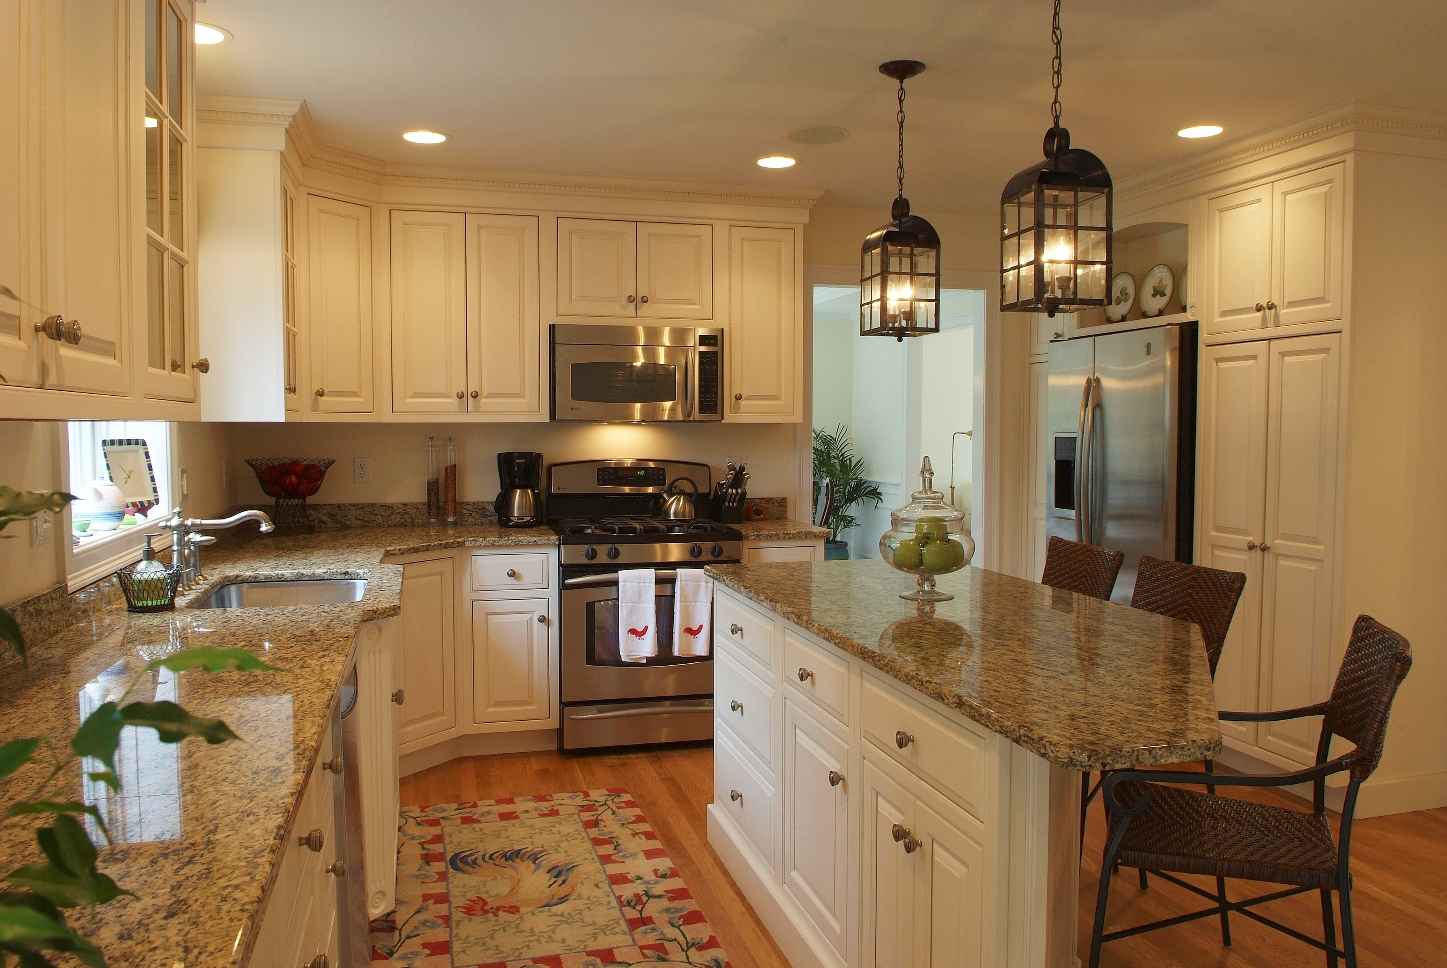 Basic Knowledge On Custom Cabinets | Cabinets Direct
